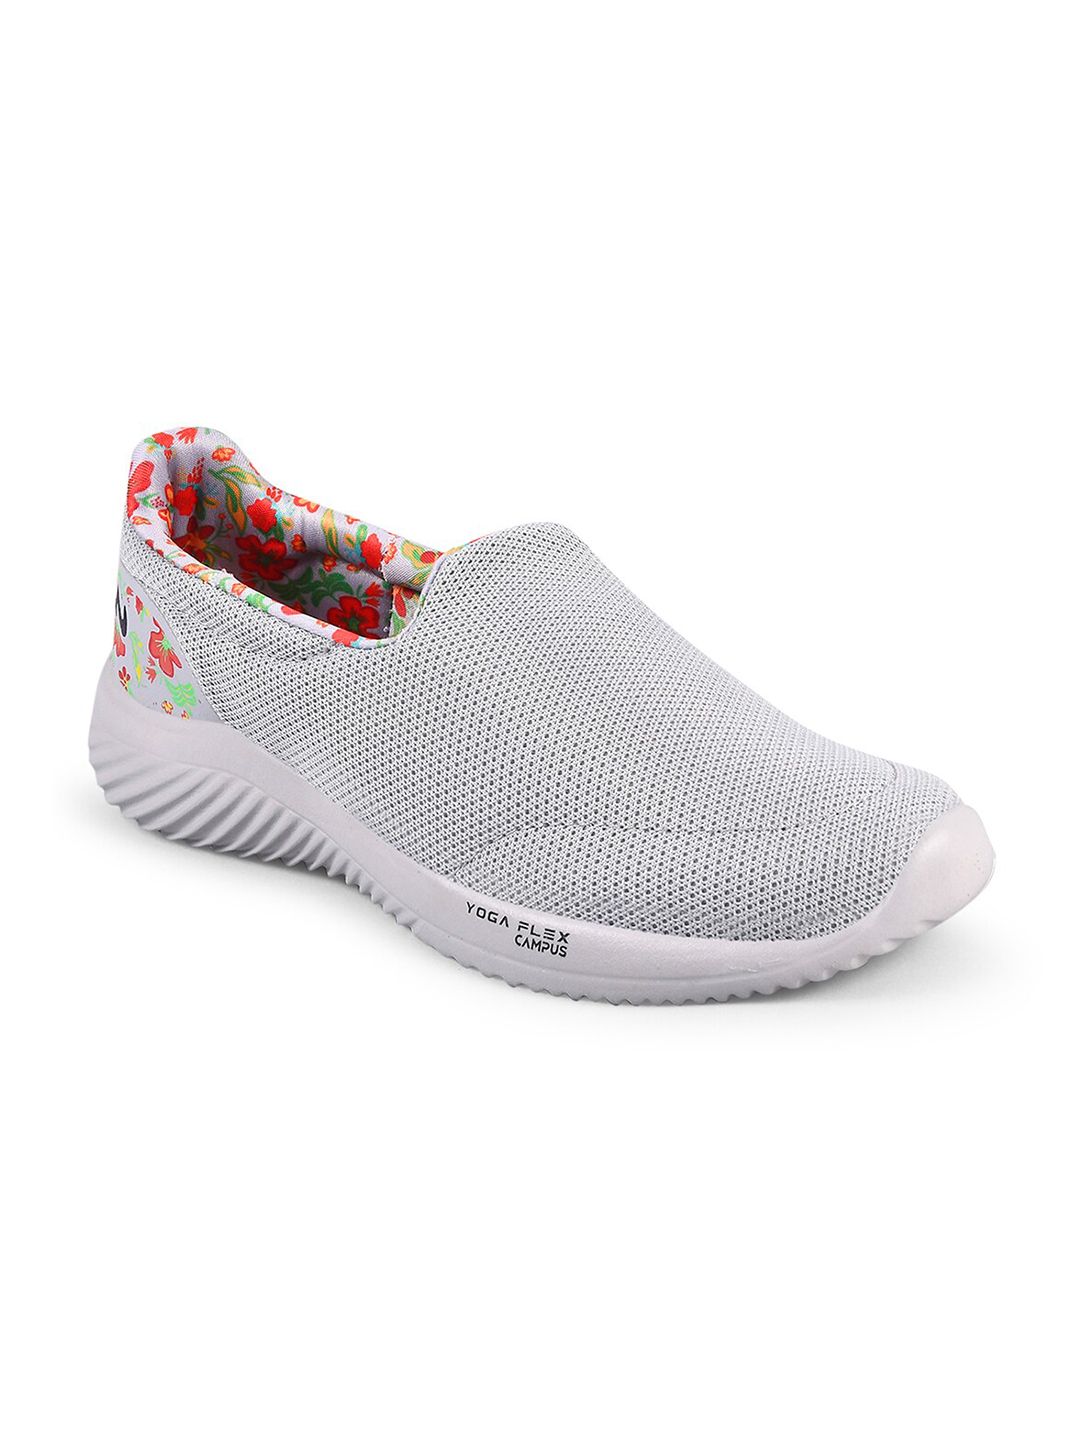 Campus Women Grey Floral Printed Slip-On Mesh Running Shoes Price in India